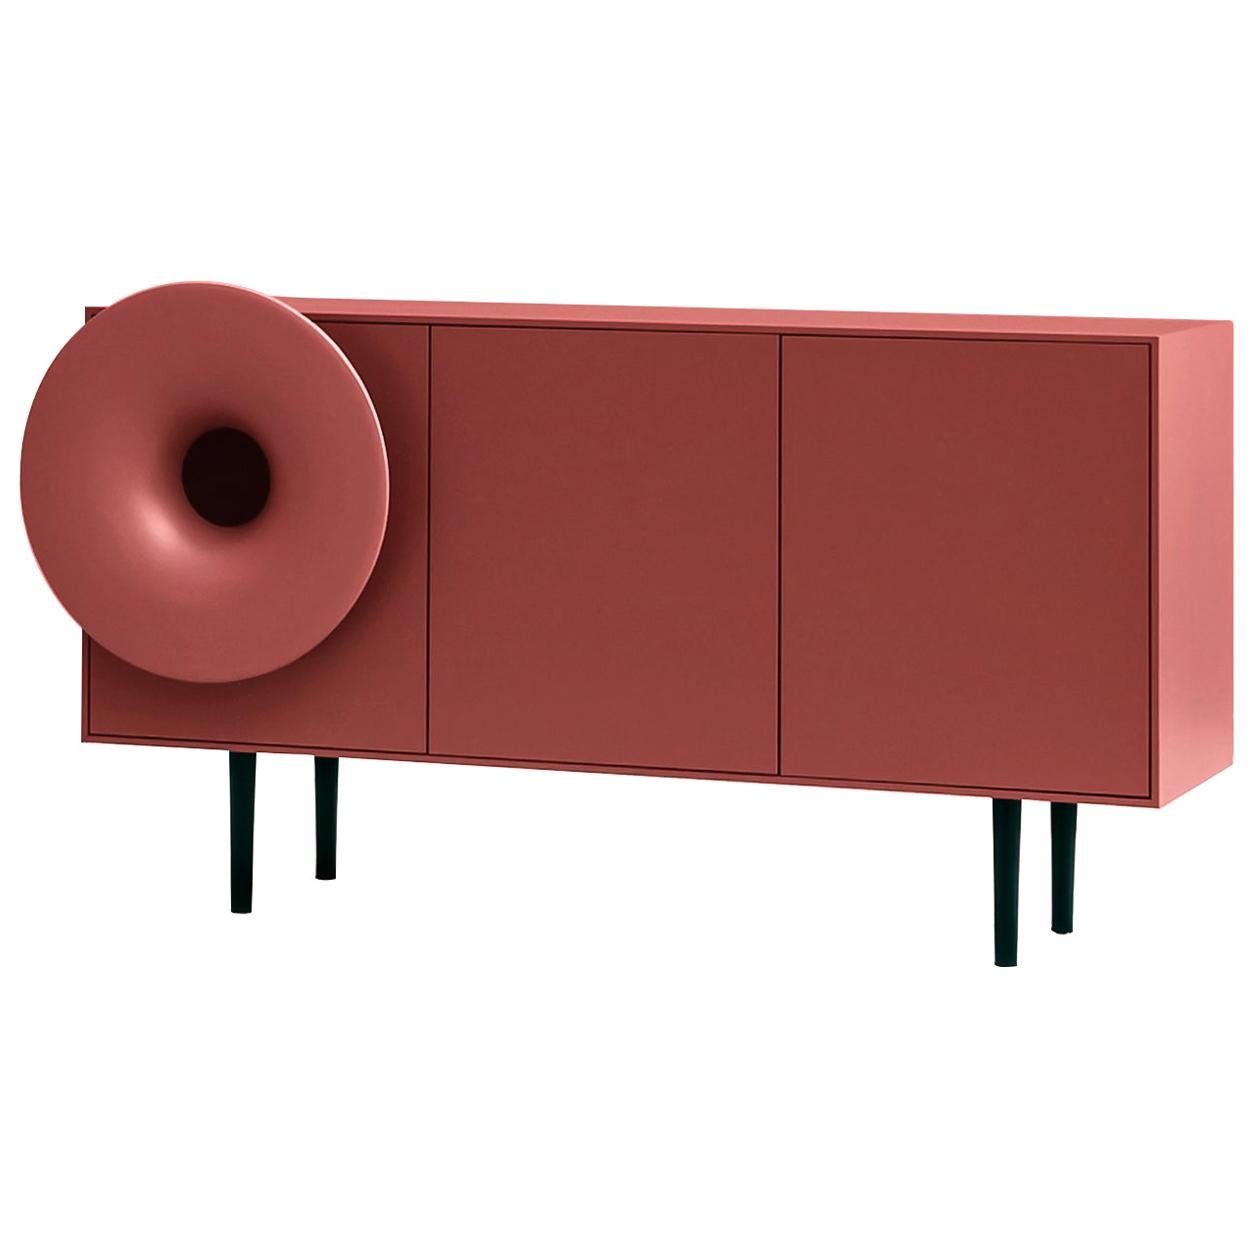 Caruso Large Cabinet in Lacquered Red Marsala and Black Legs, by Paolo Cappello